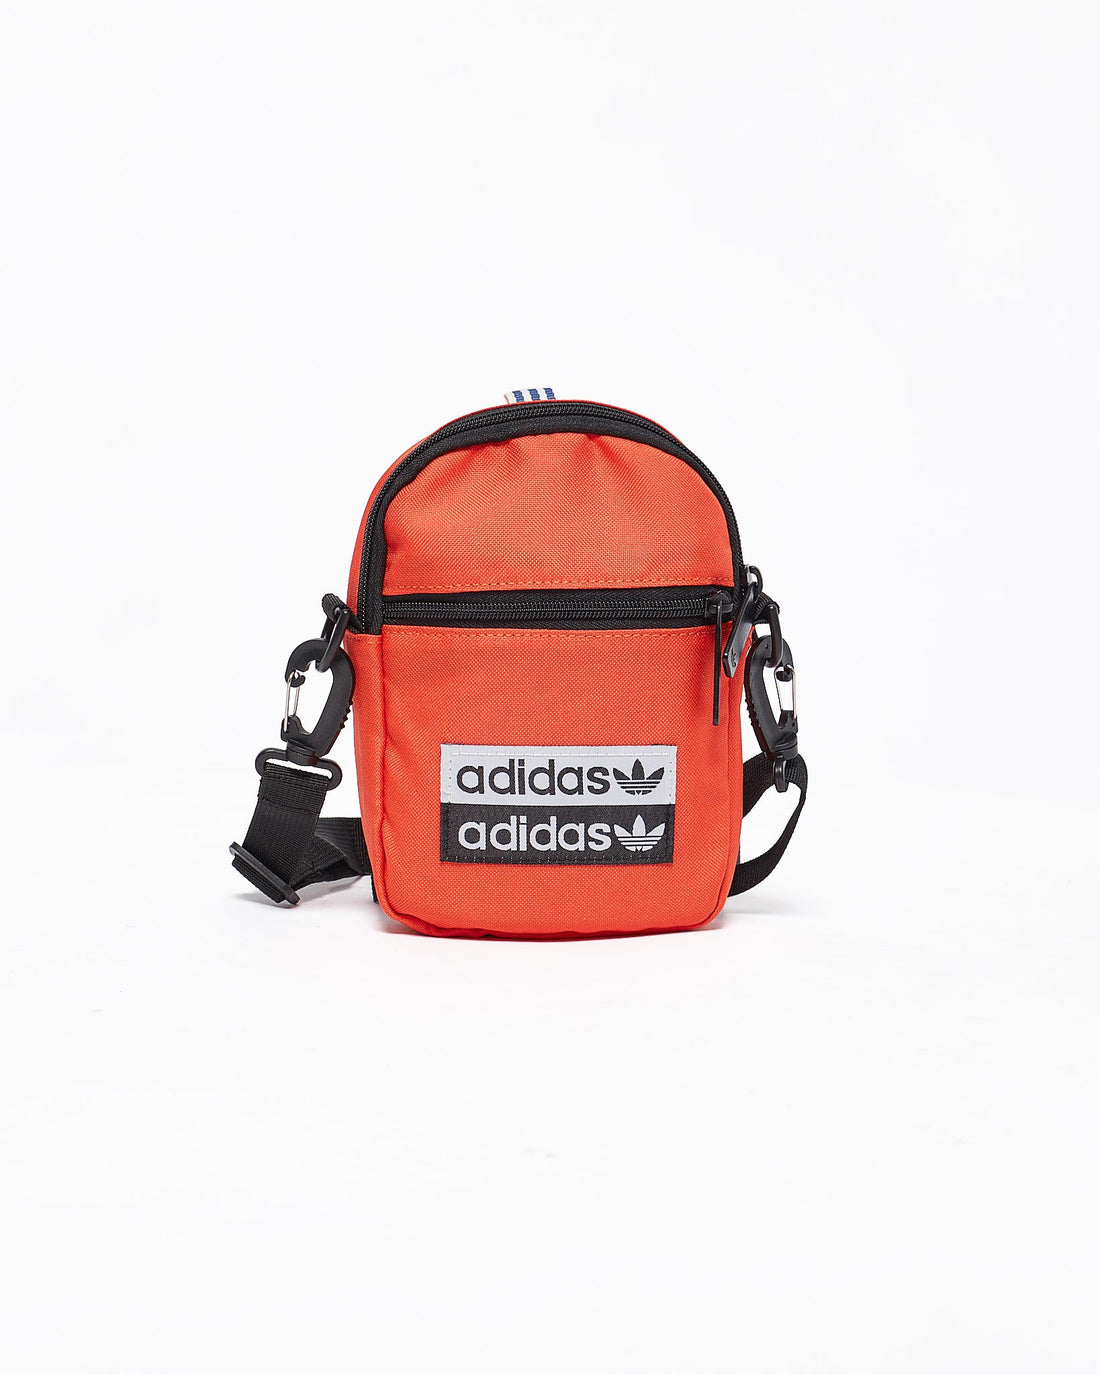 MOI OUTFIT-AD Logo Printed Mini Unisex Sling Bag 14.90